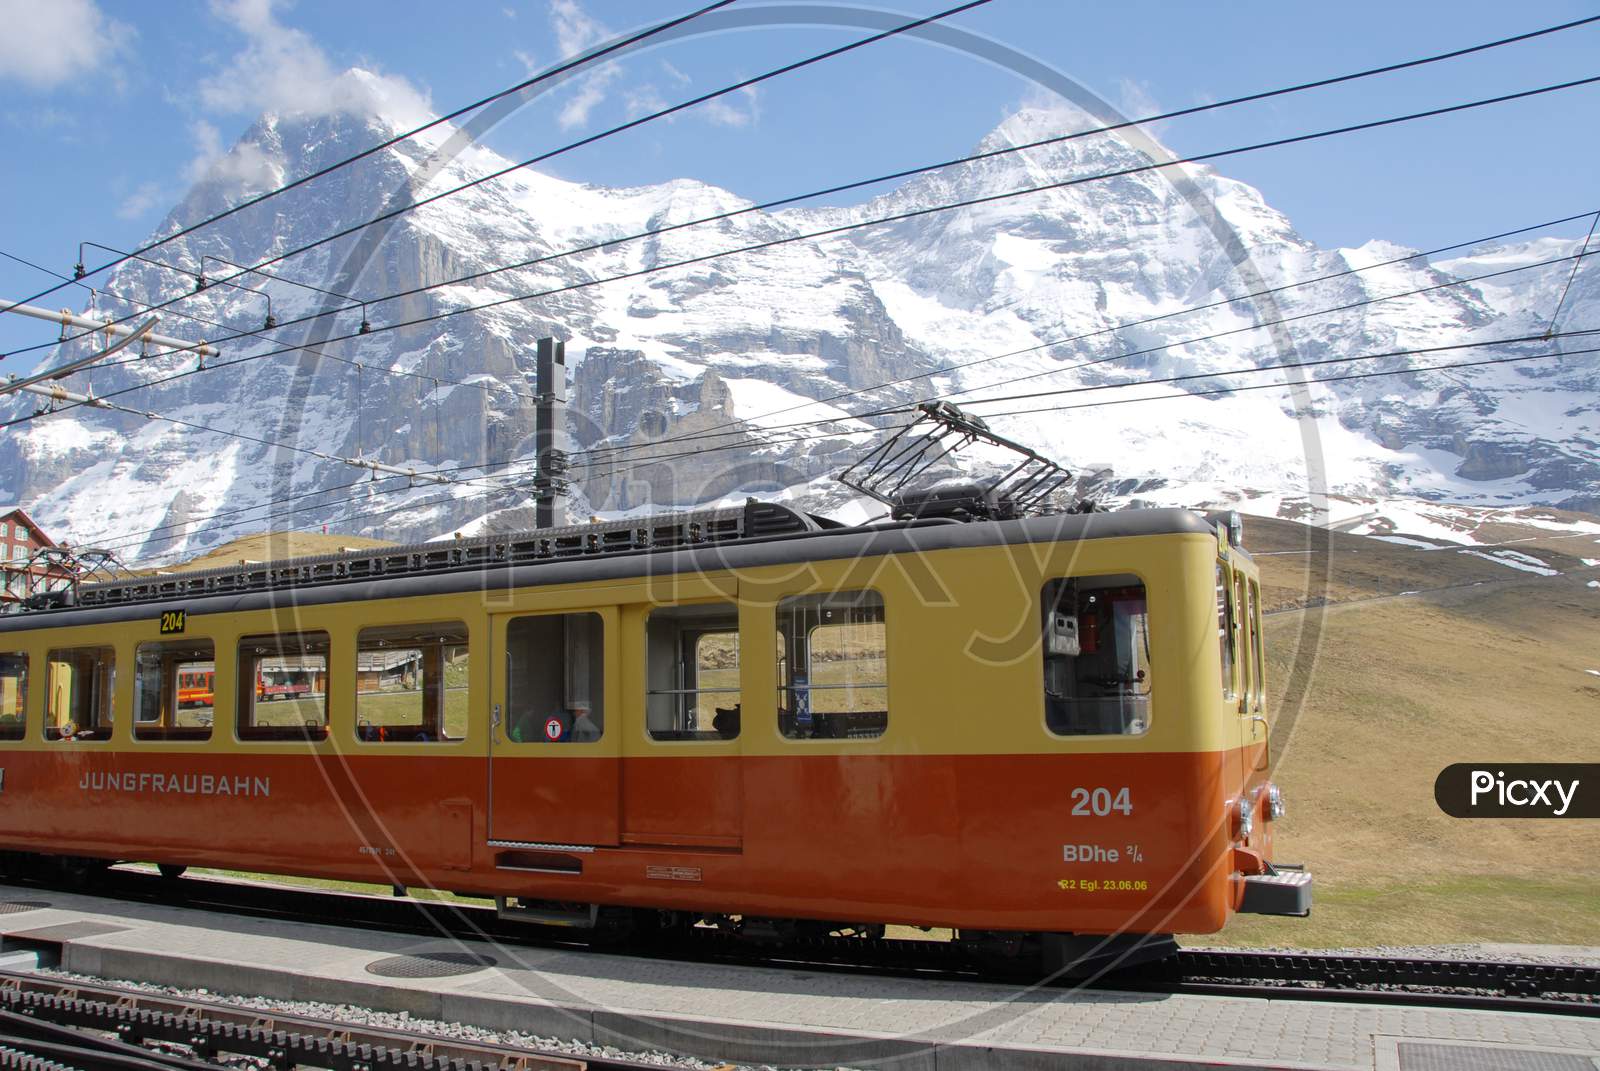 Cable Trains in The Terrains of Switzerland  With out Tourists Due To Corona Virus Or COVID-19 Outbreak